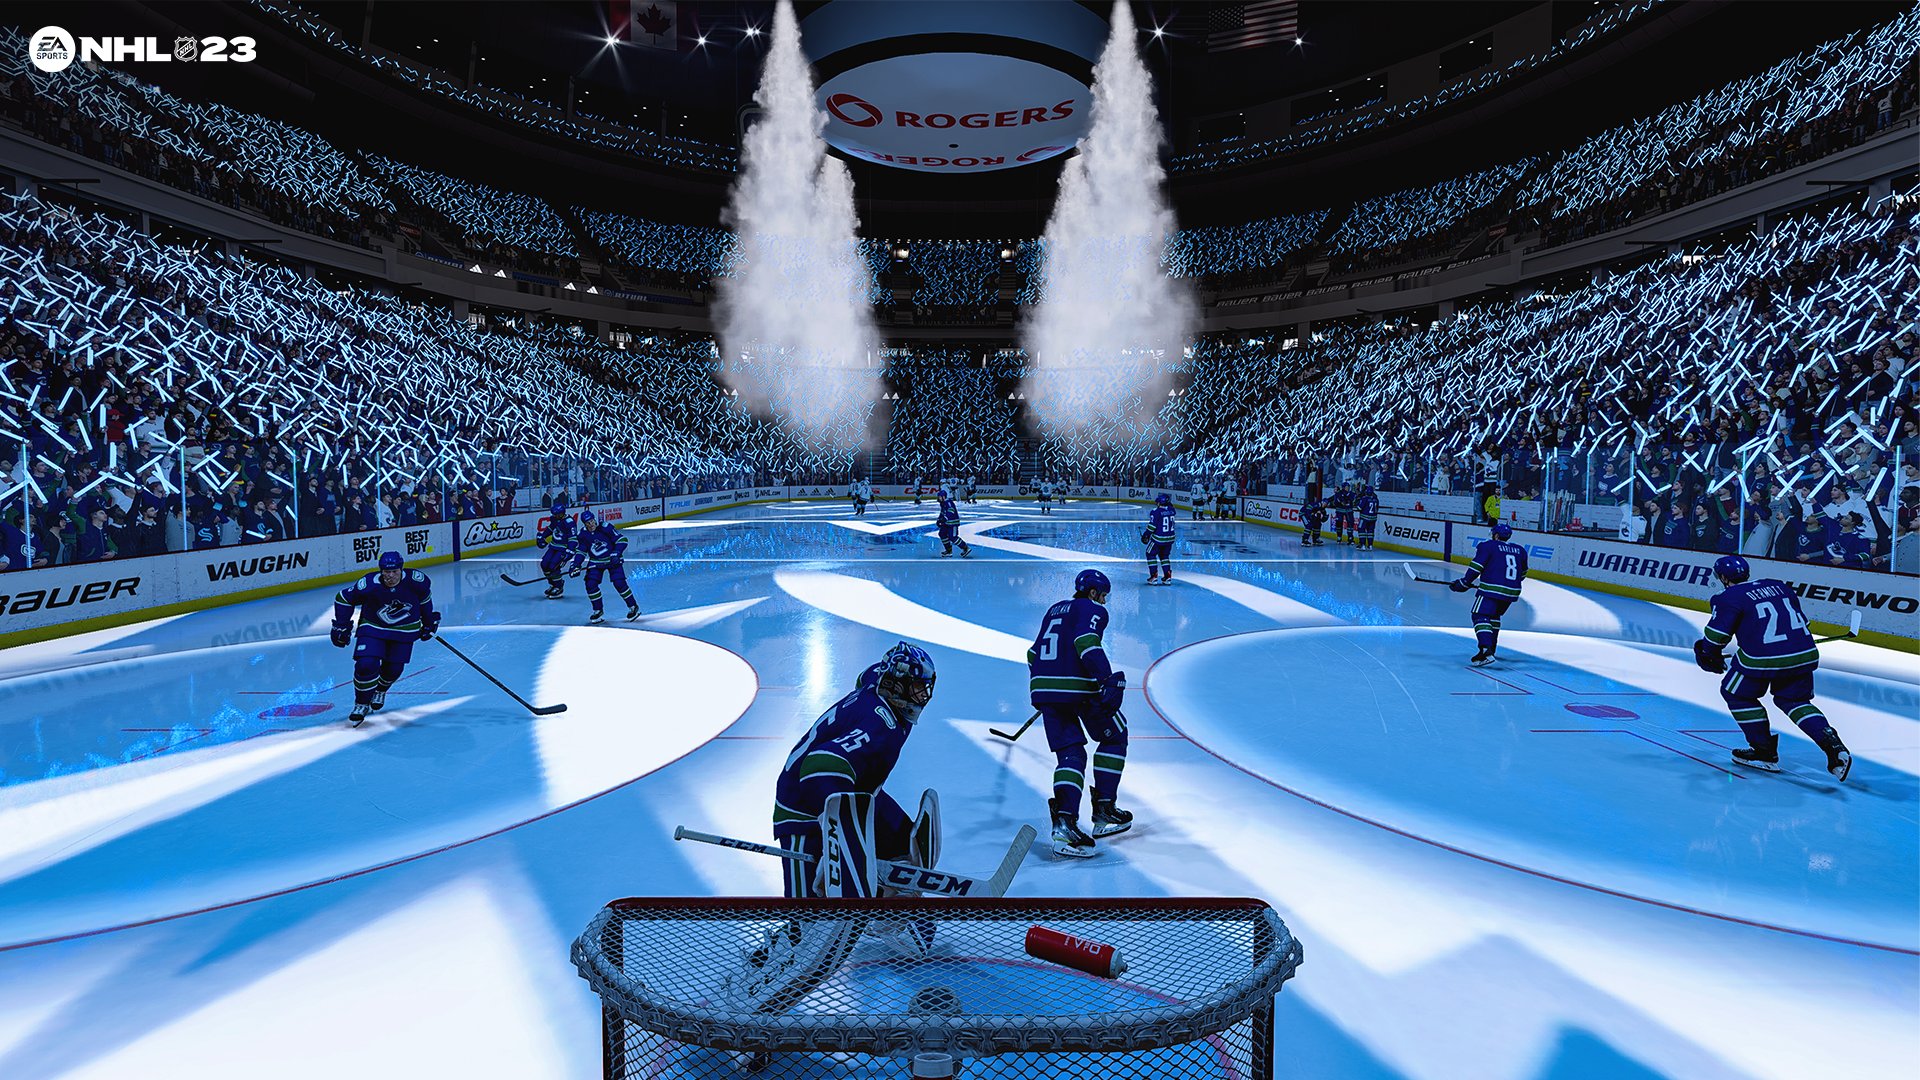 Who Should Be NHL 24's Highest Rated Players? EA Sports Wants YOU To Decide